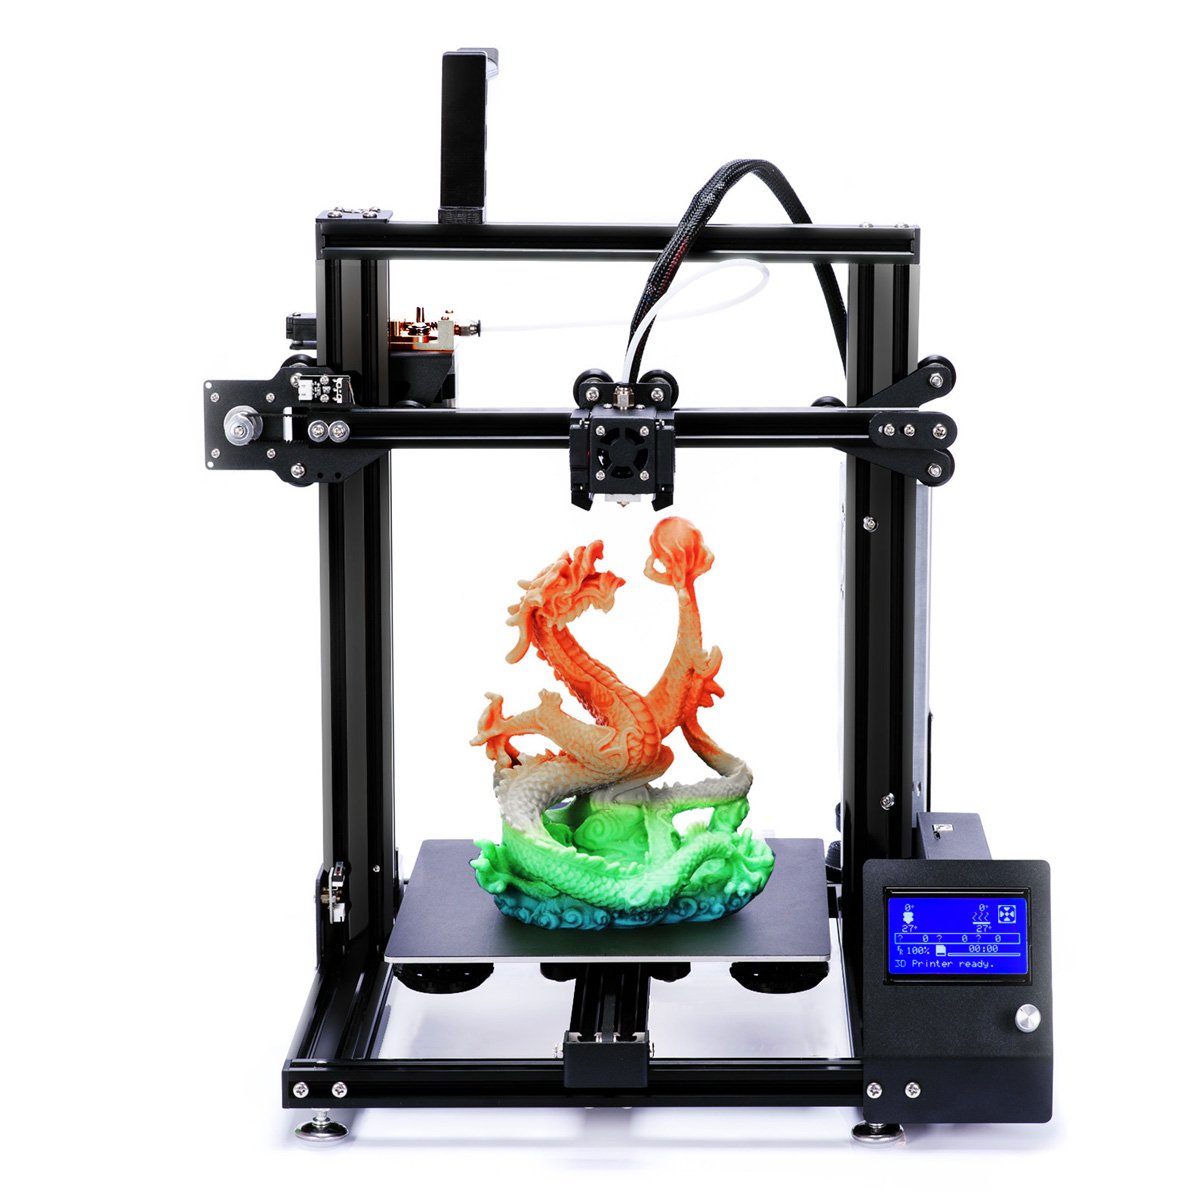 ADIMLab Gantry-S 3D Printer DIY Kit 230*230*260mm Printing Size Support Power Resume/Filament Run-out Detector w/ Metal Extruder & 3 Fans for V6 T 2